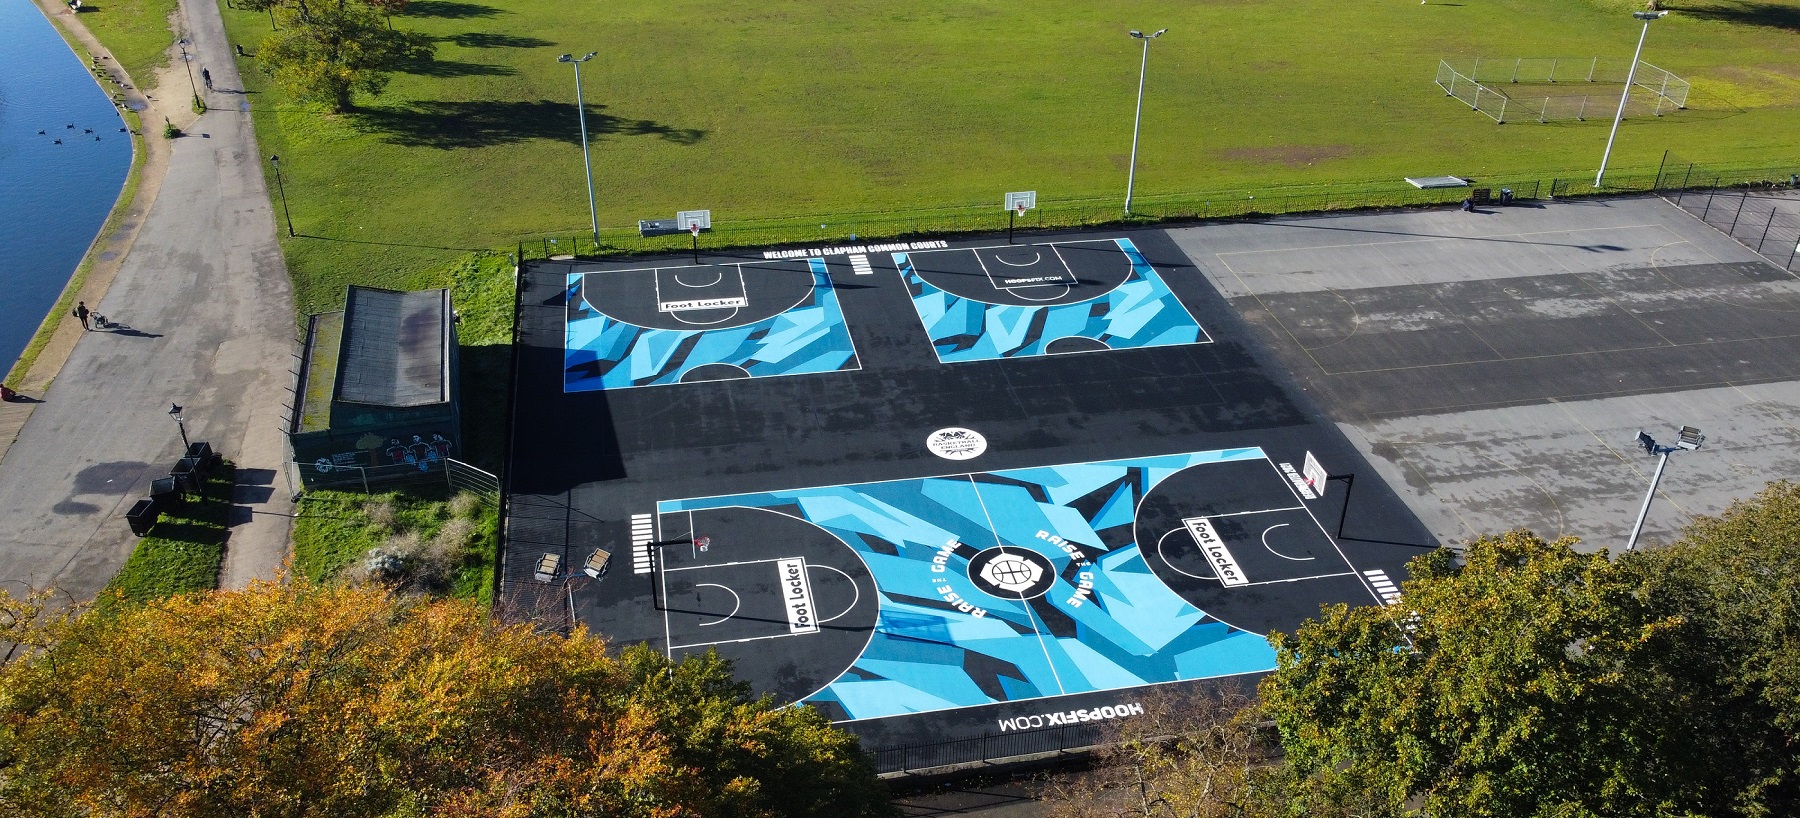 Lambeth and partners Raise the Game with redesigned basketball court